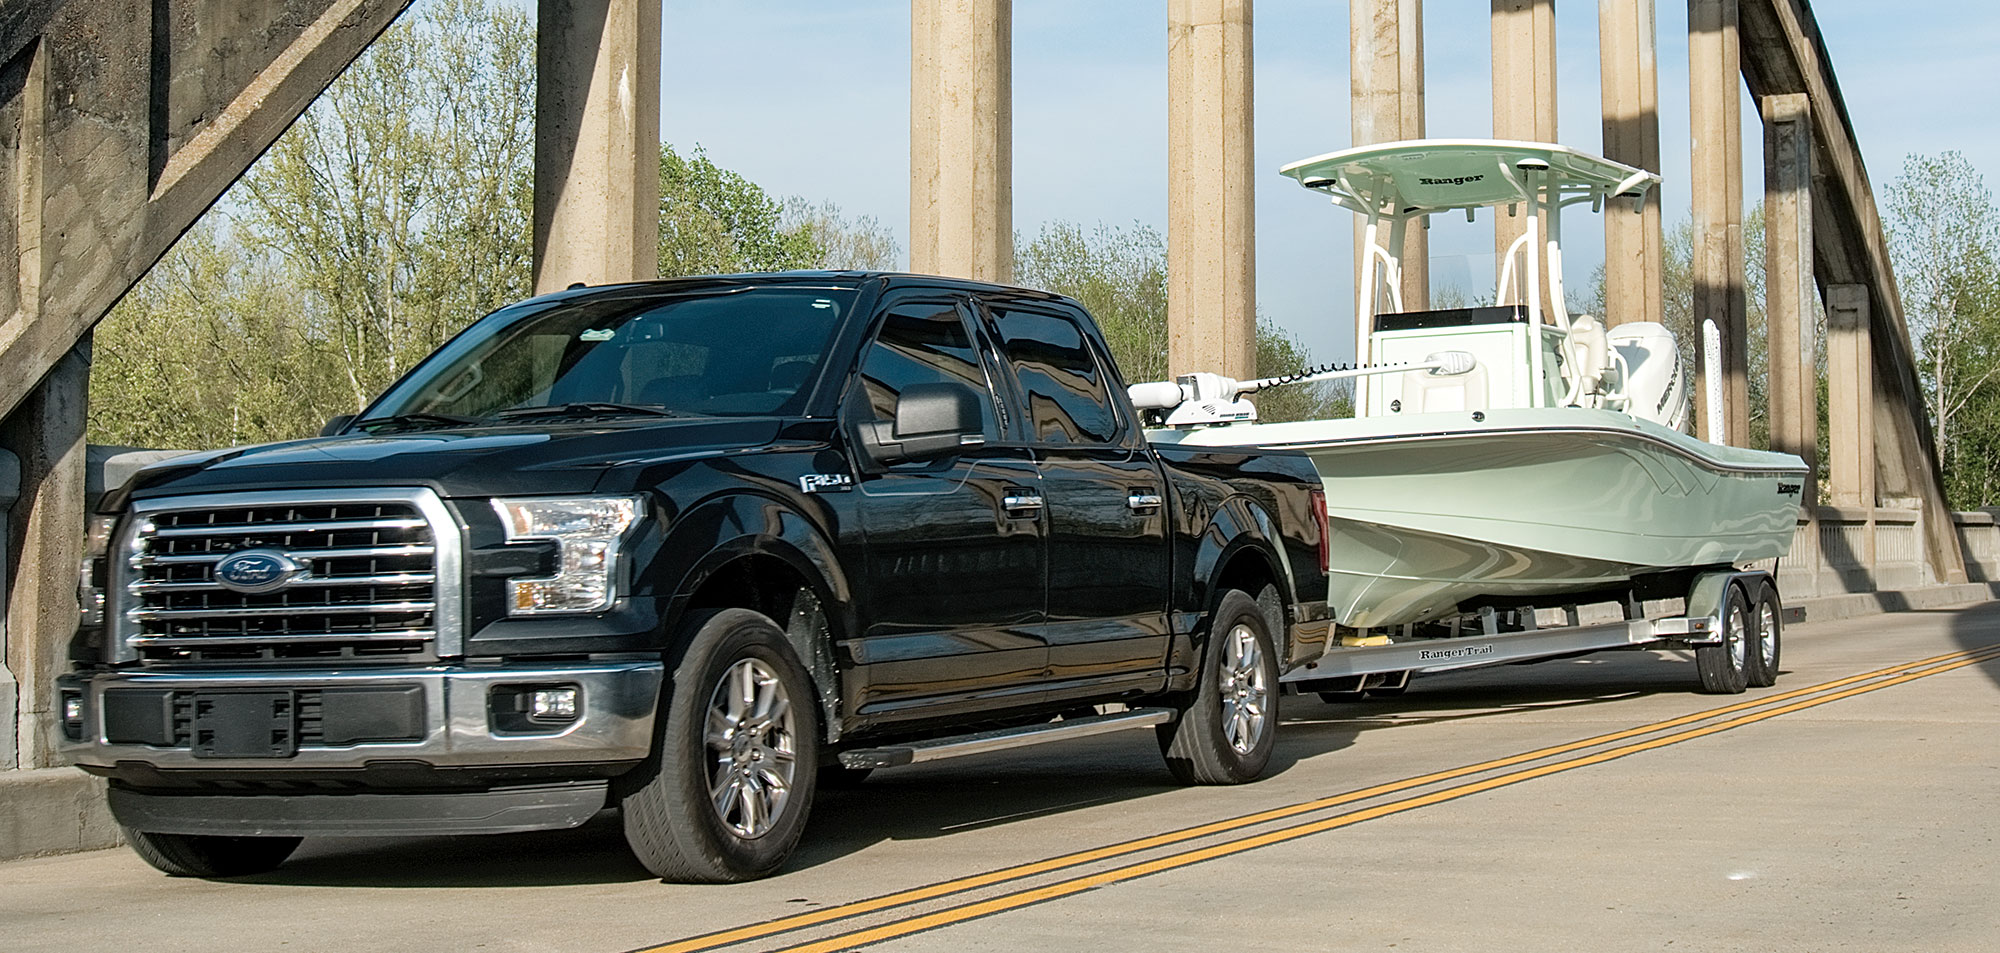 Road-Ready Boats: Top Tips for Towing Like a Pro